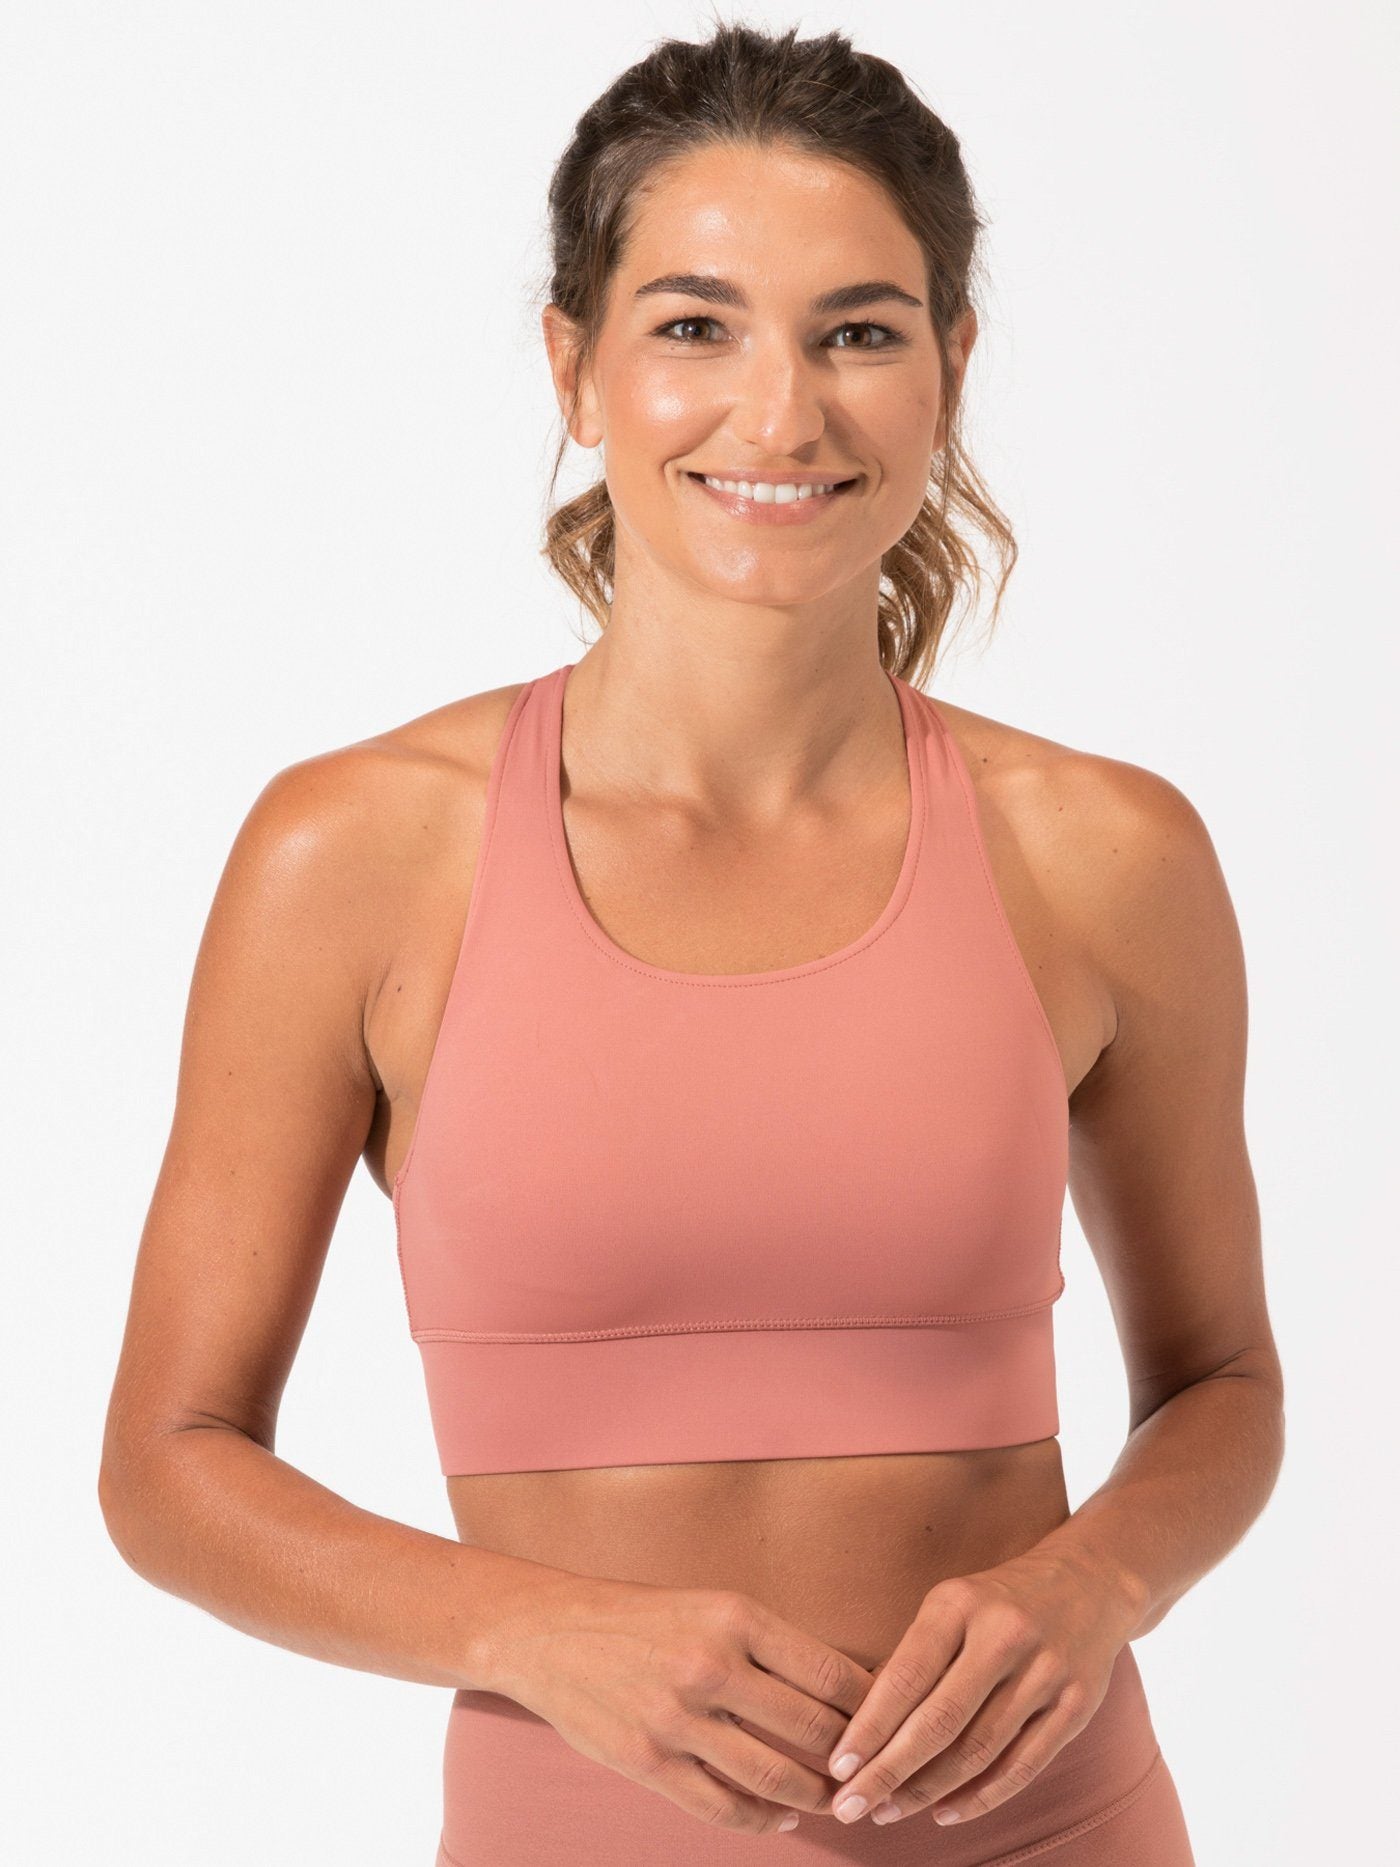 Strappy Sports Bra Womens Tops Bra Threads 4 Thought 